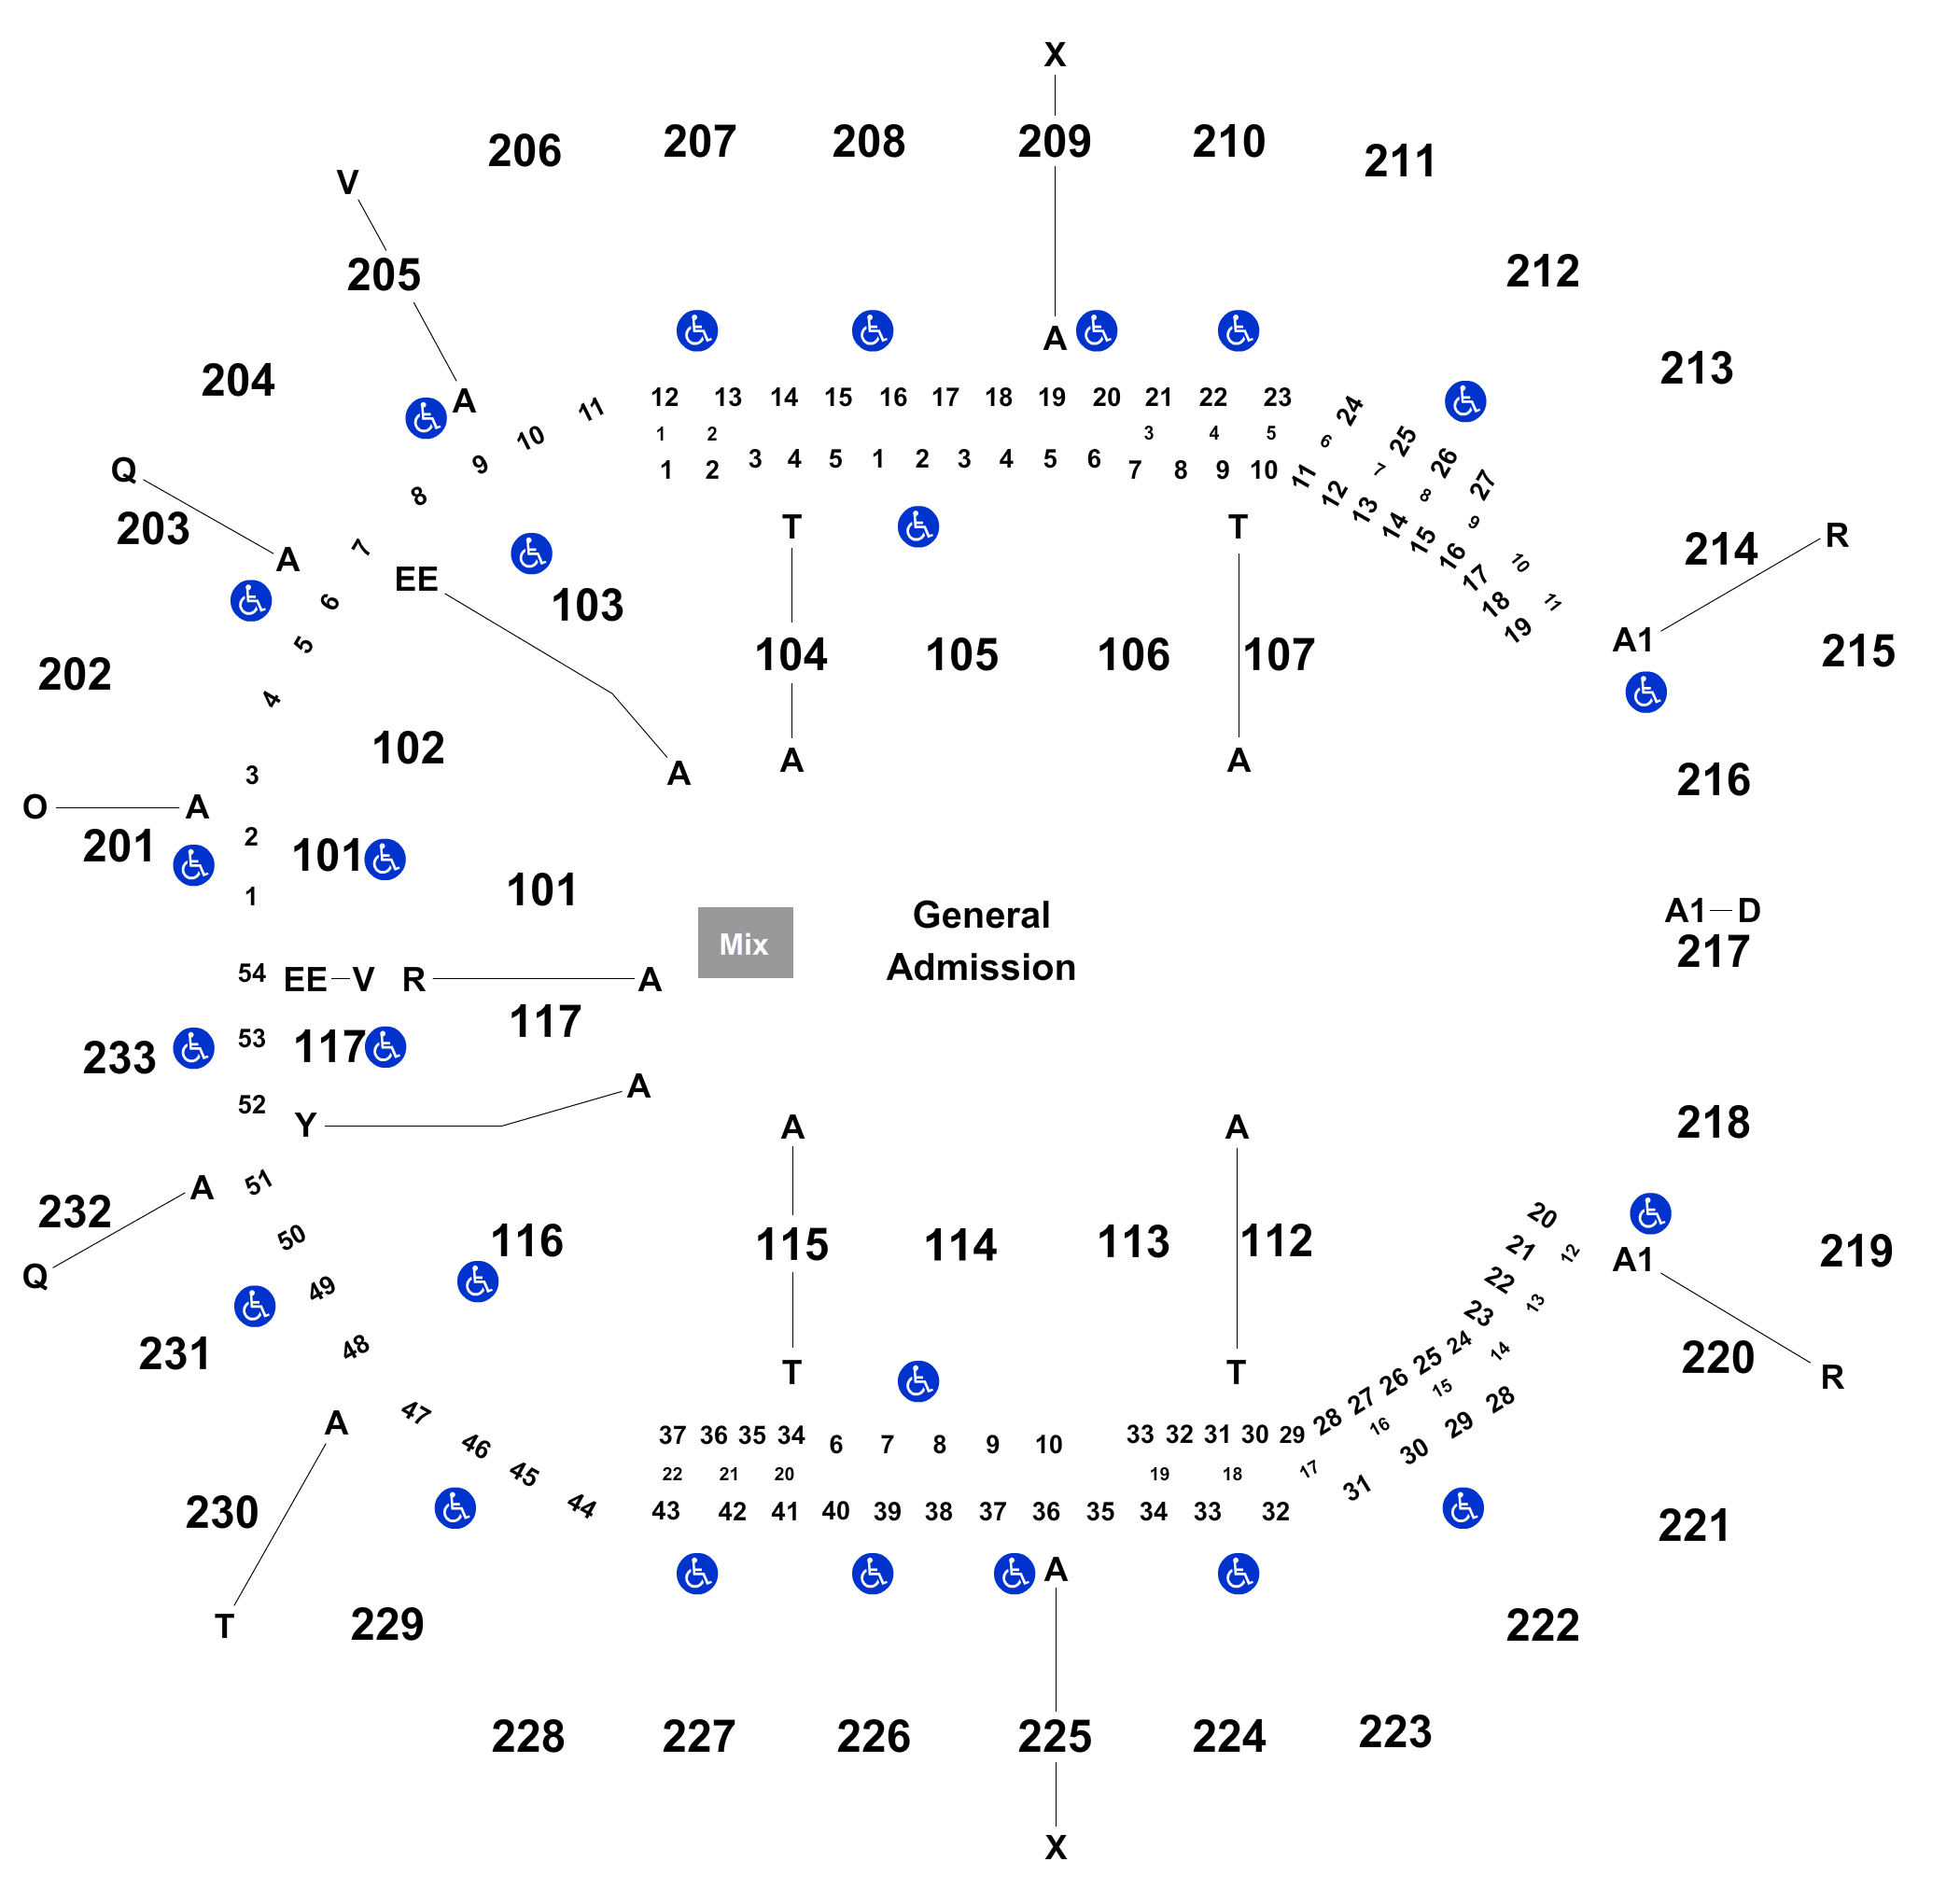 Spectrum Center Seating Charts 